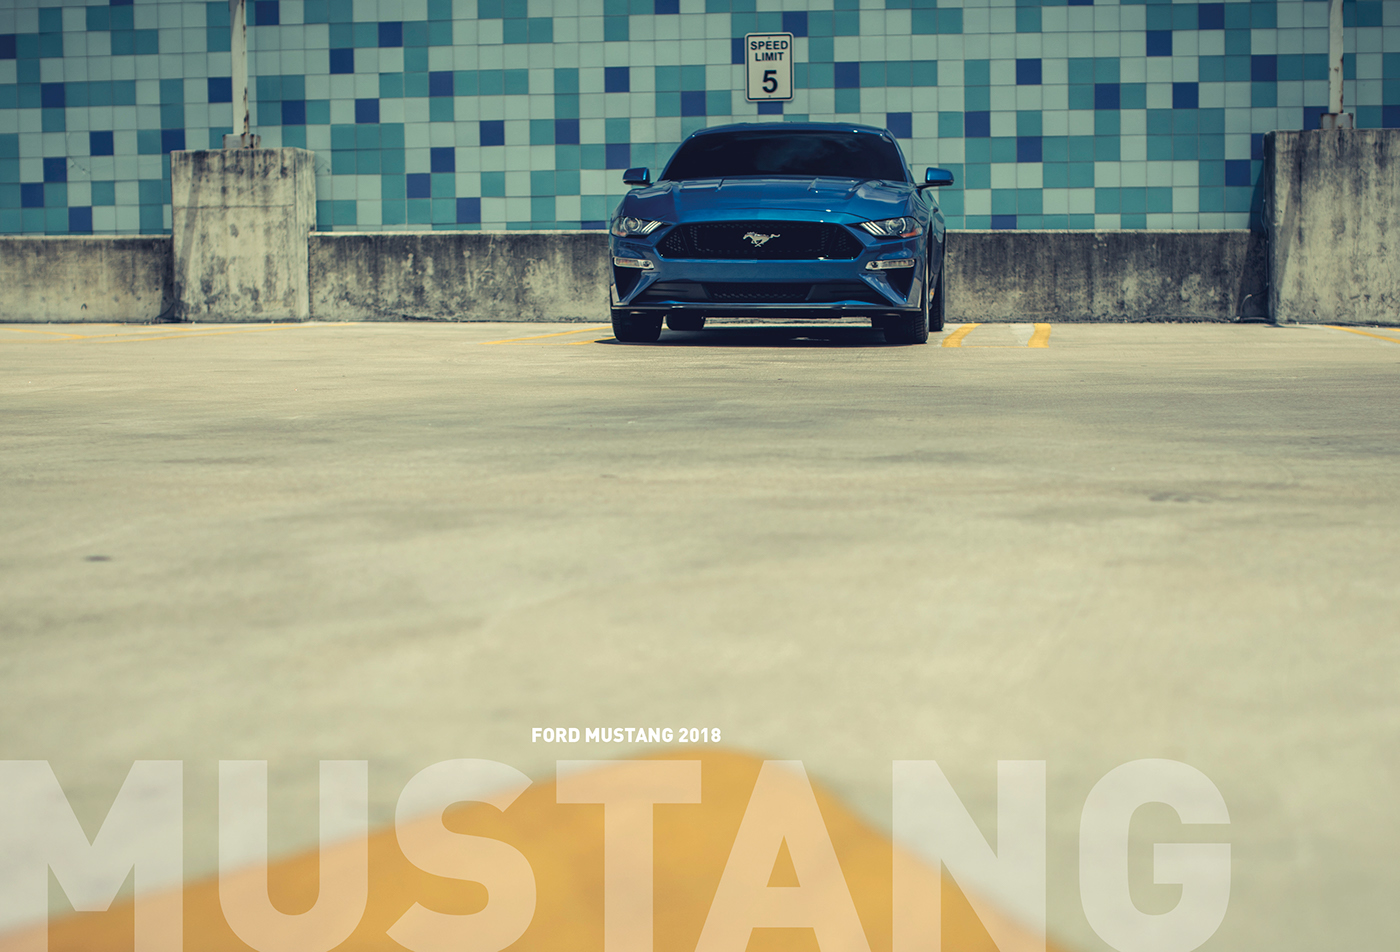 Ford Mustang Ford Mustang muscle car car advertising transportation